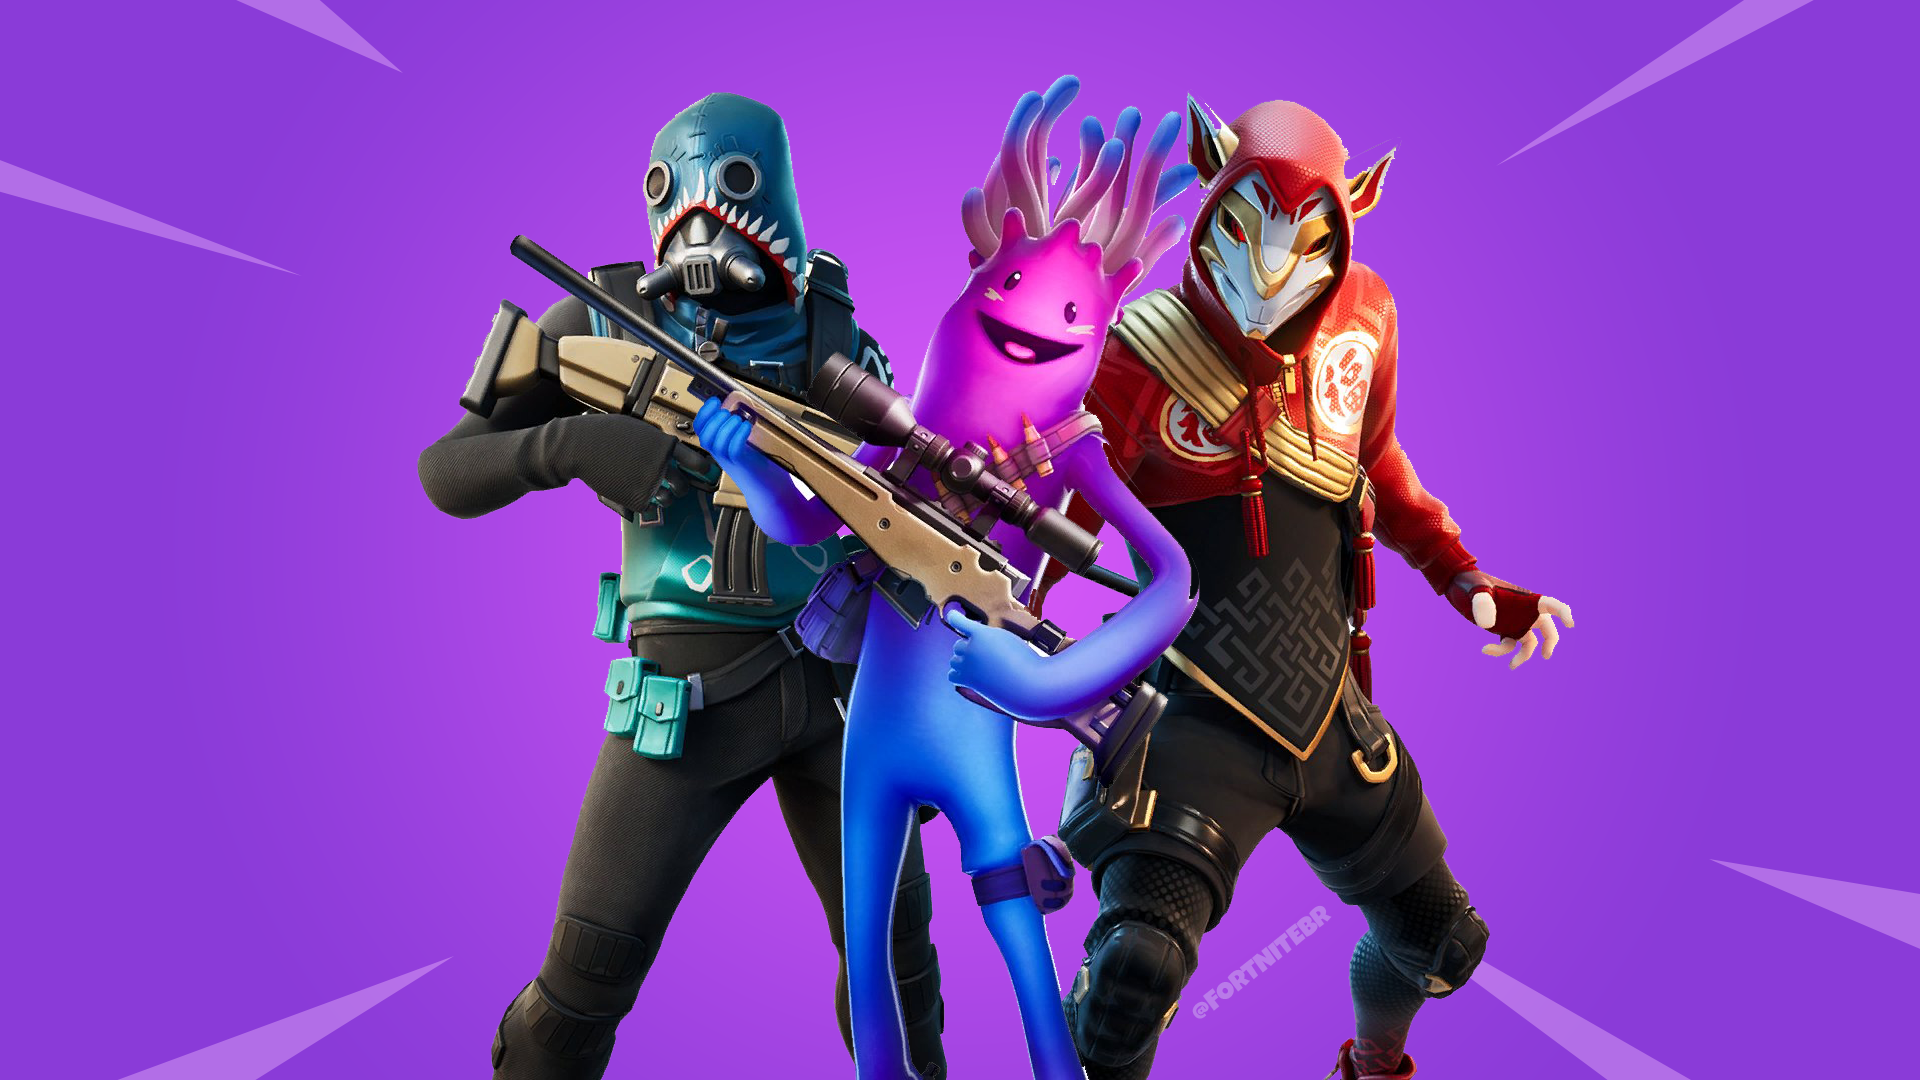 Fortnite Patch v11.40 - All Leaked Cosmetics (Skins, Emotes, Gliders, Wraps)